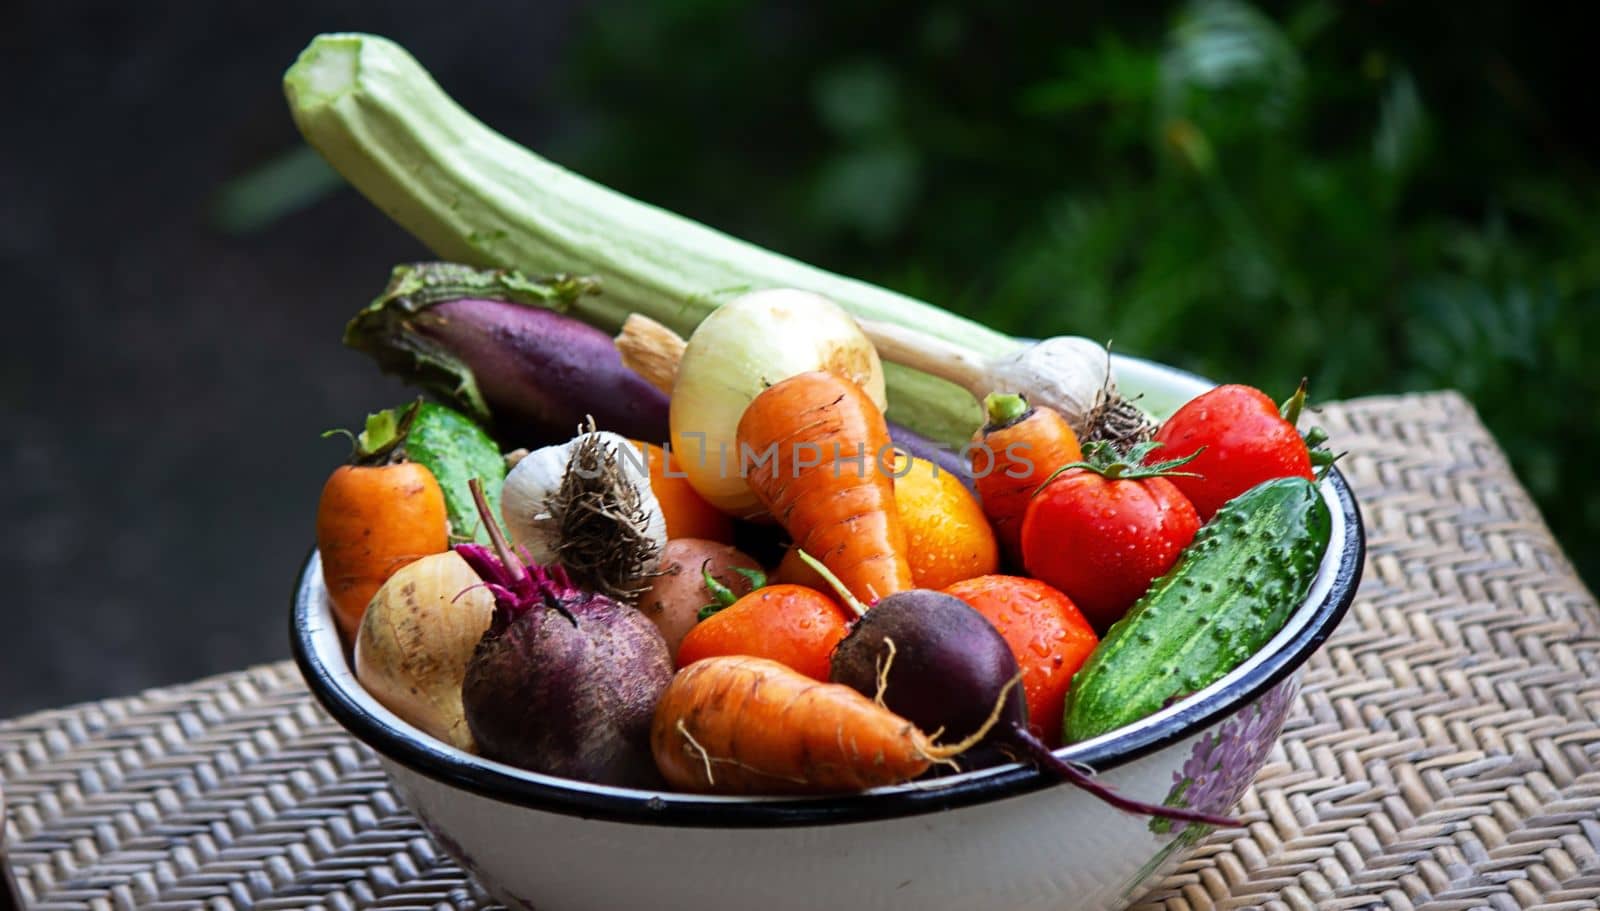 fresh picked vegetables in a bowl in the garden. Selective focus